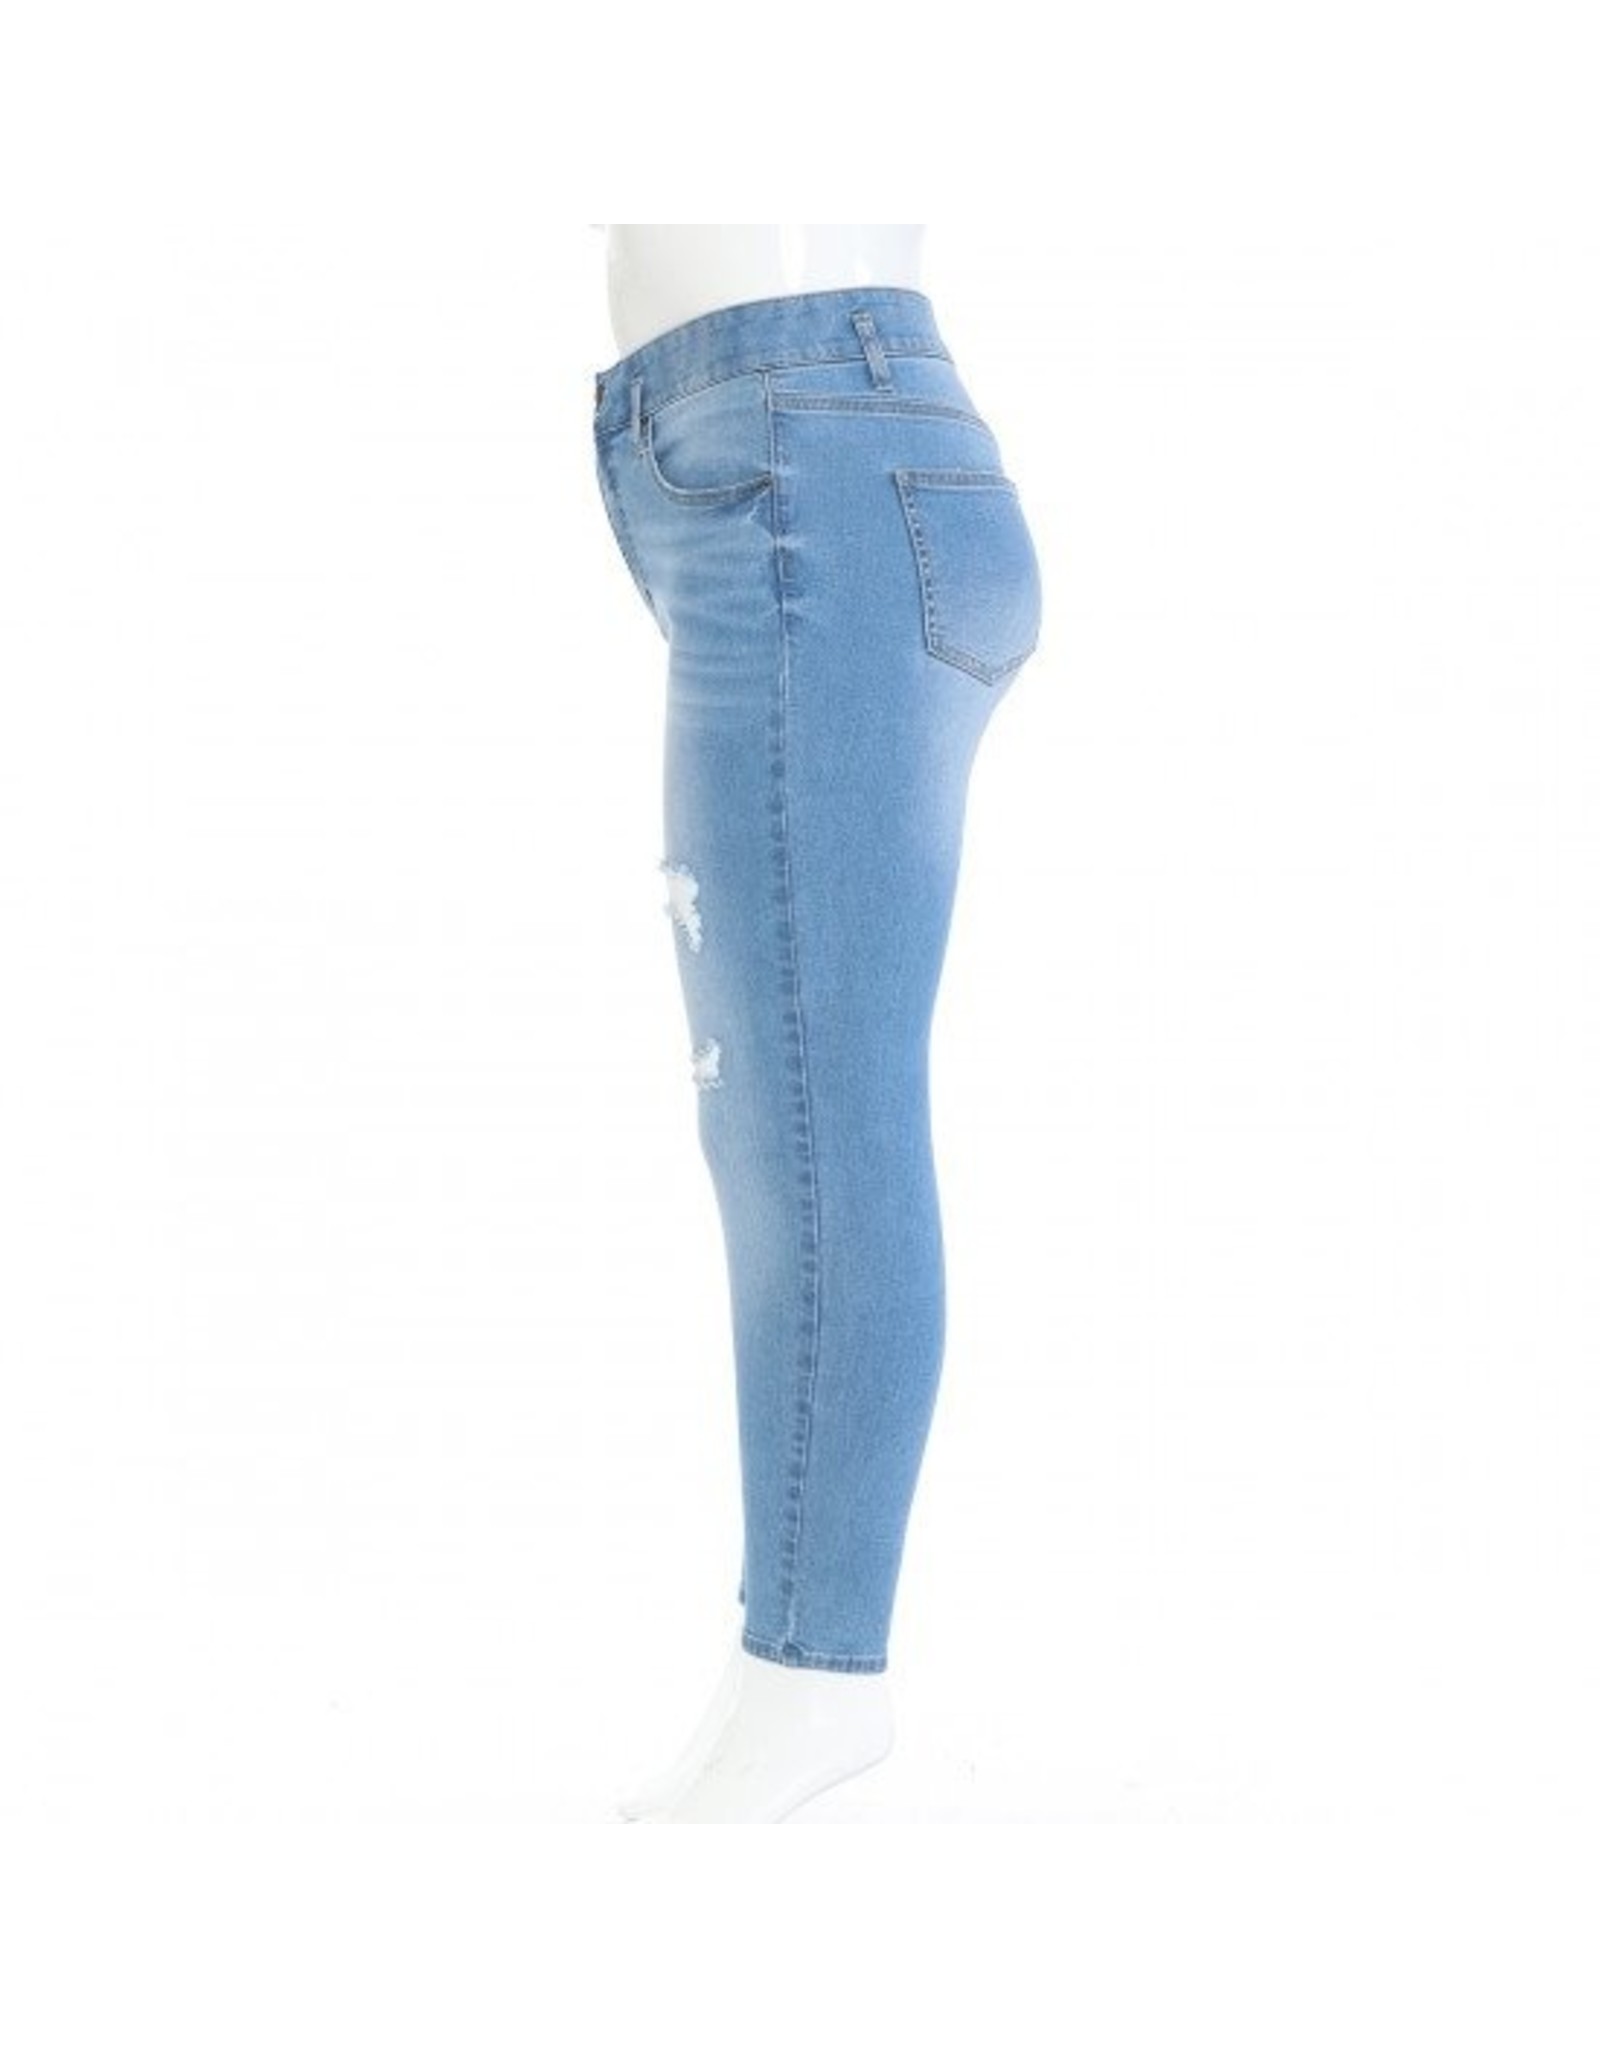 Women's High Waisted & Tummy Slimming Jeans - 90219Xl